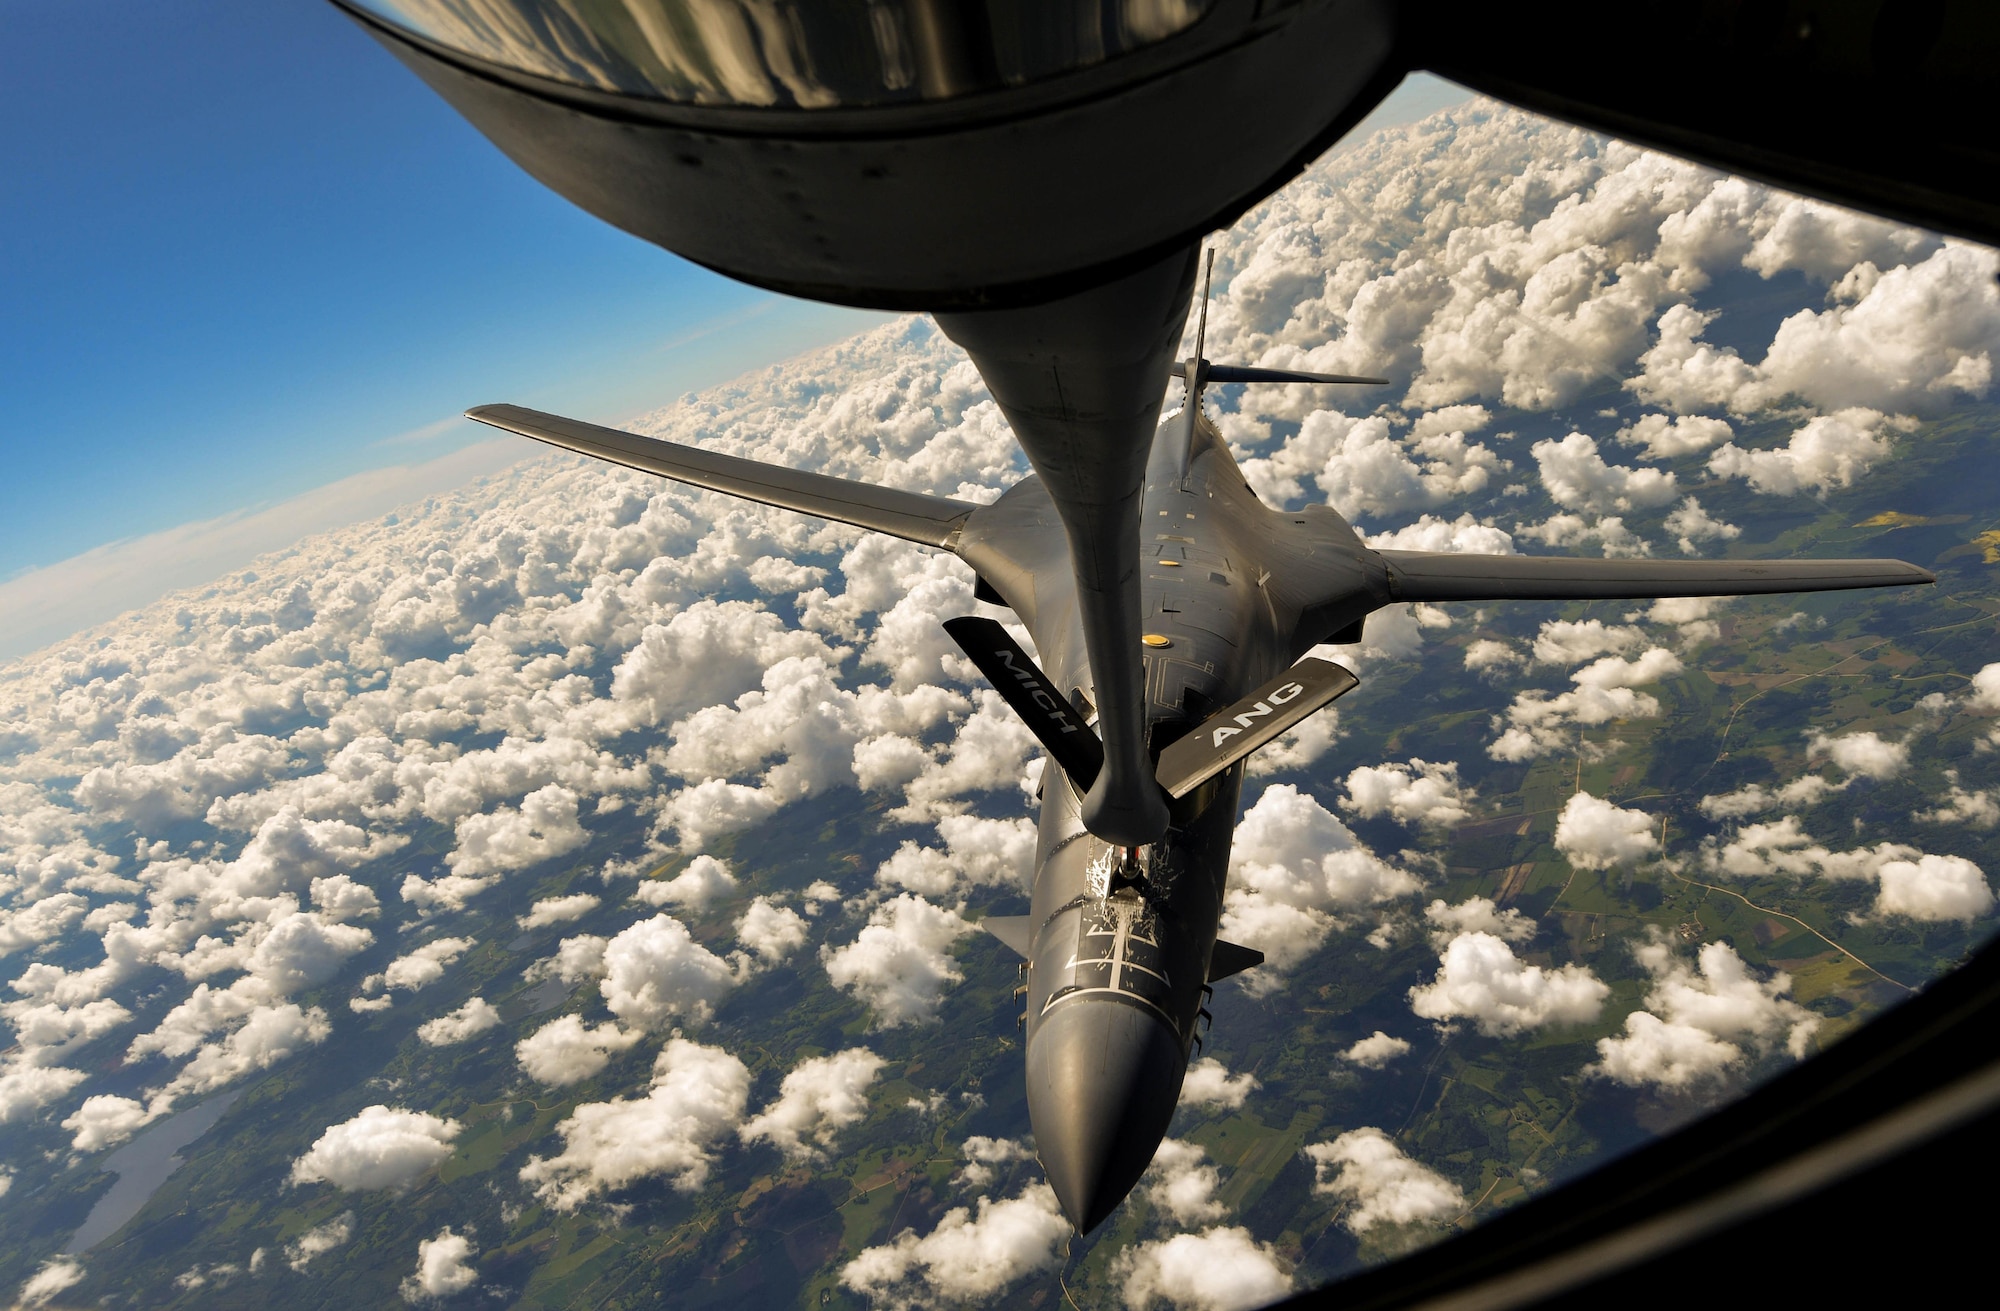 A U.S. Air Force Global Strike Command B-1B Lancer refuels from a U.S. Air National Guard KC-135 Stratotanker during exercise Saber Strike 17 above Riga, Latvia, June 8, 2017. U.S. Air National Guard Senior Airman Jordan Kaminski, 171st Air Refueling Squadron boom operator, off-loaded almost 50,000 pounds of fuel at 6,000 pounds per minute. Saber Strike 17 promotes regional stability and security, while strengthening partner capabilities and fostering trust. (U.S. Air Force photo by Senior Airman Tryphena Mayhugh)